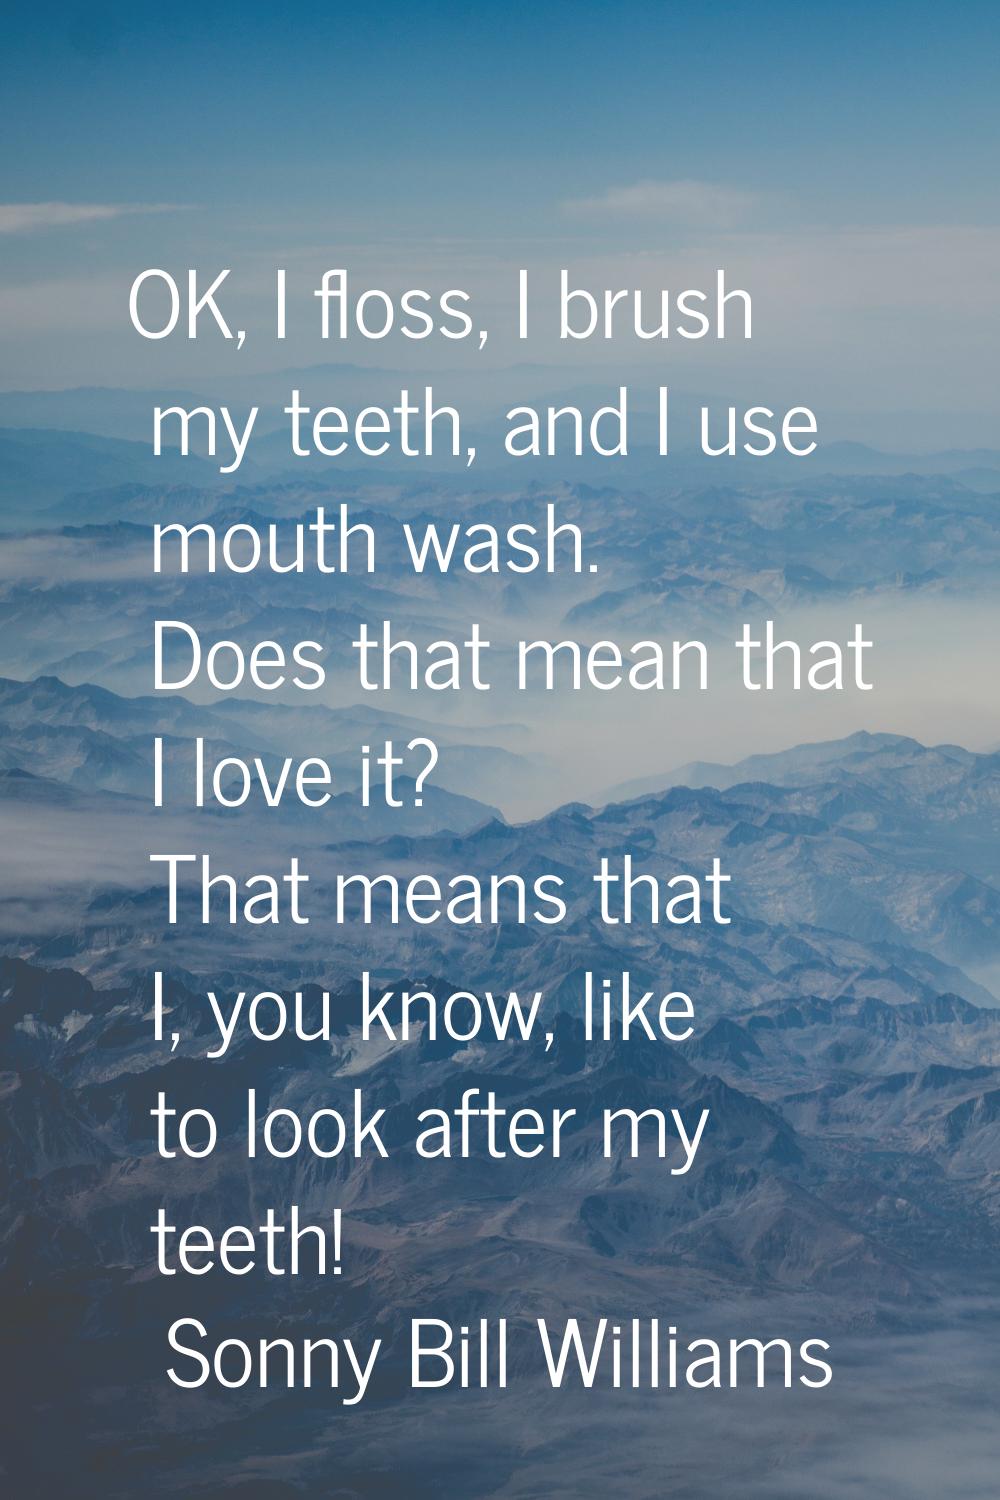 OK, I floss, I brush my teeth, and I use mouth wash. Does that mean that I love it? That means that